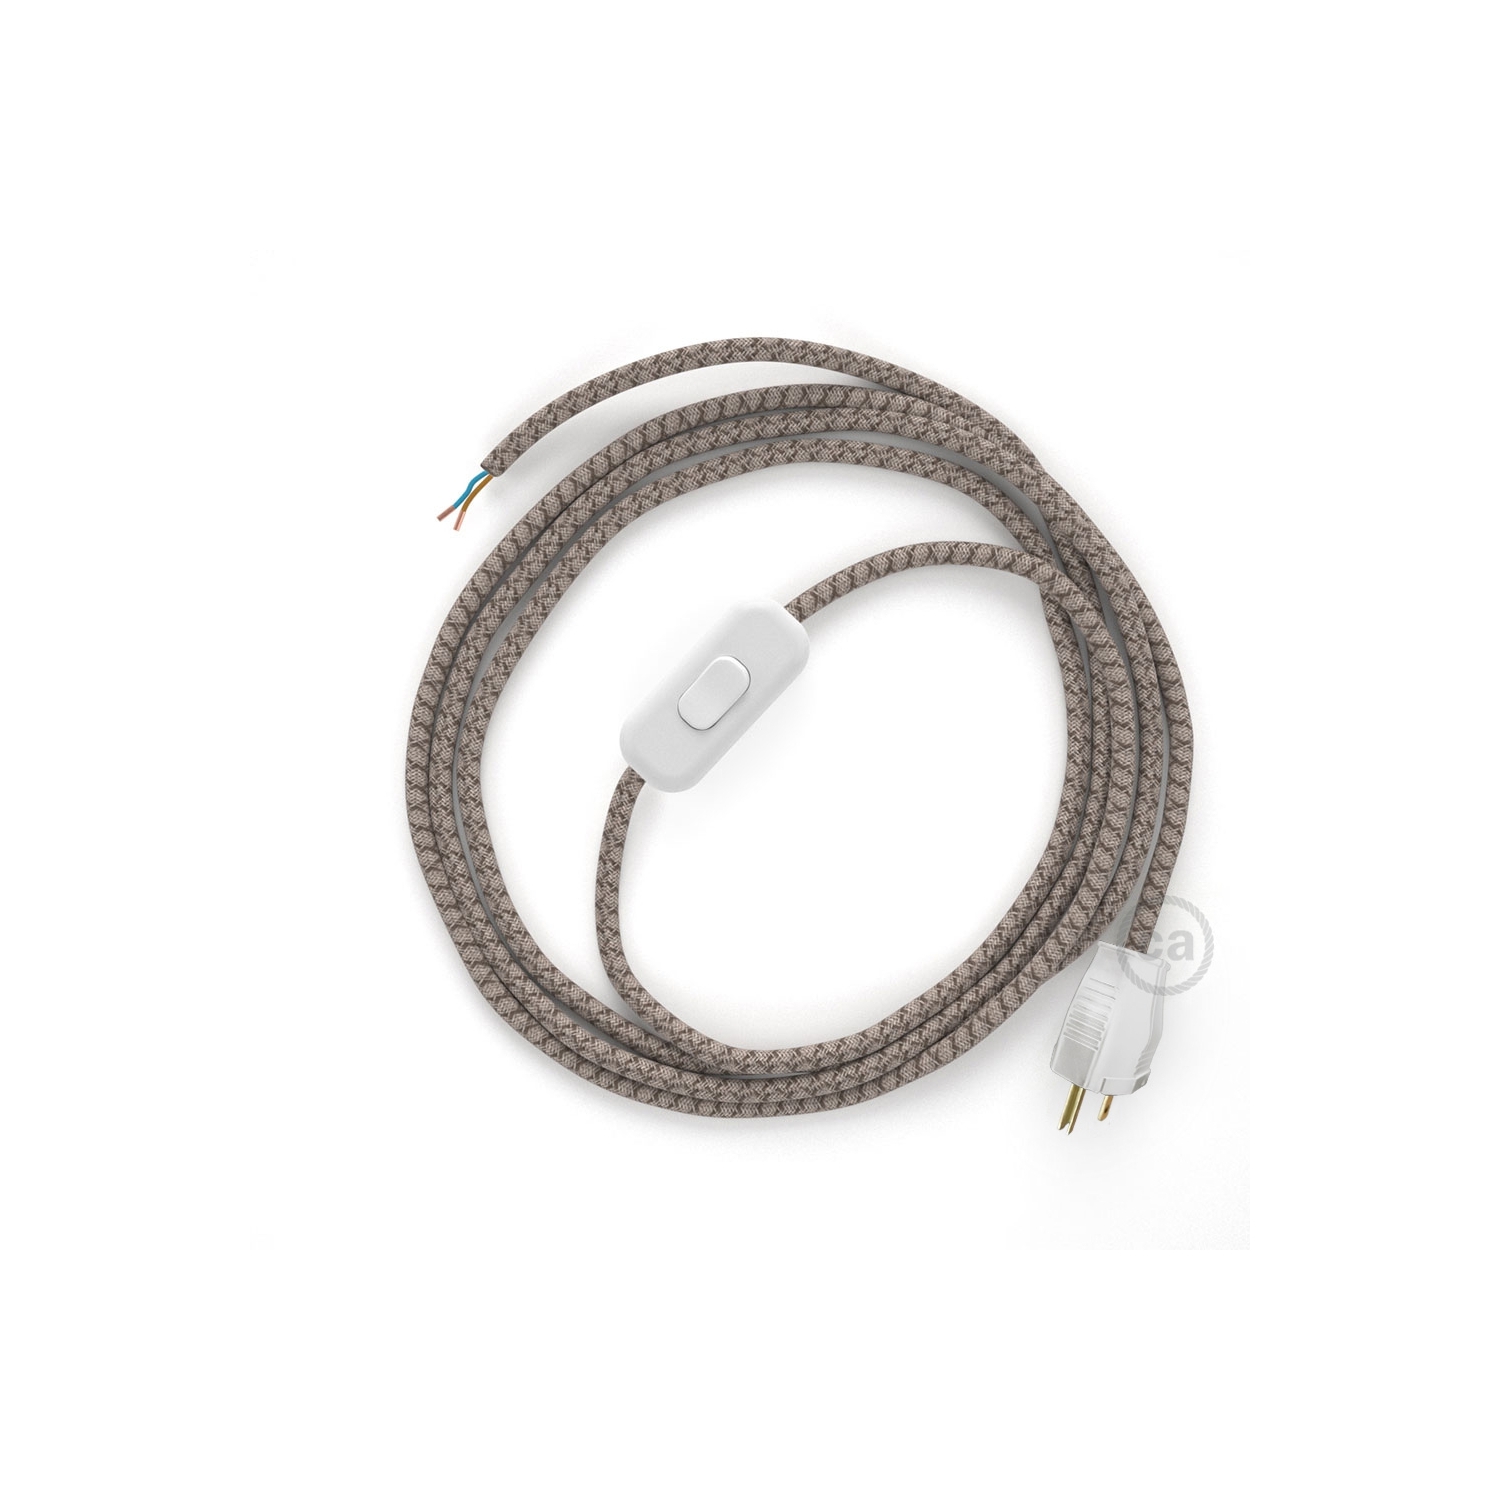 Power Cord with in-line switch, RD63 Natural & Brown Linen CrissCross - Choose color of switch/plug